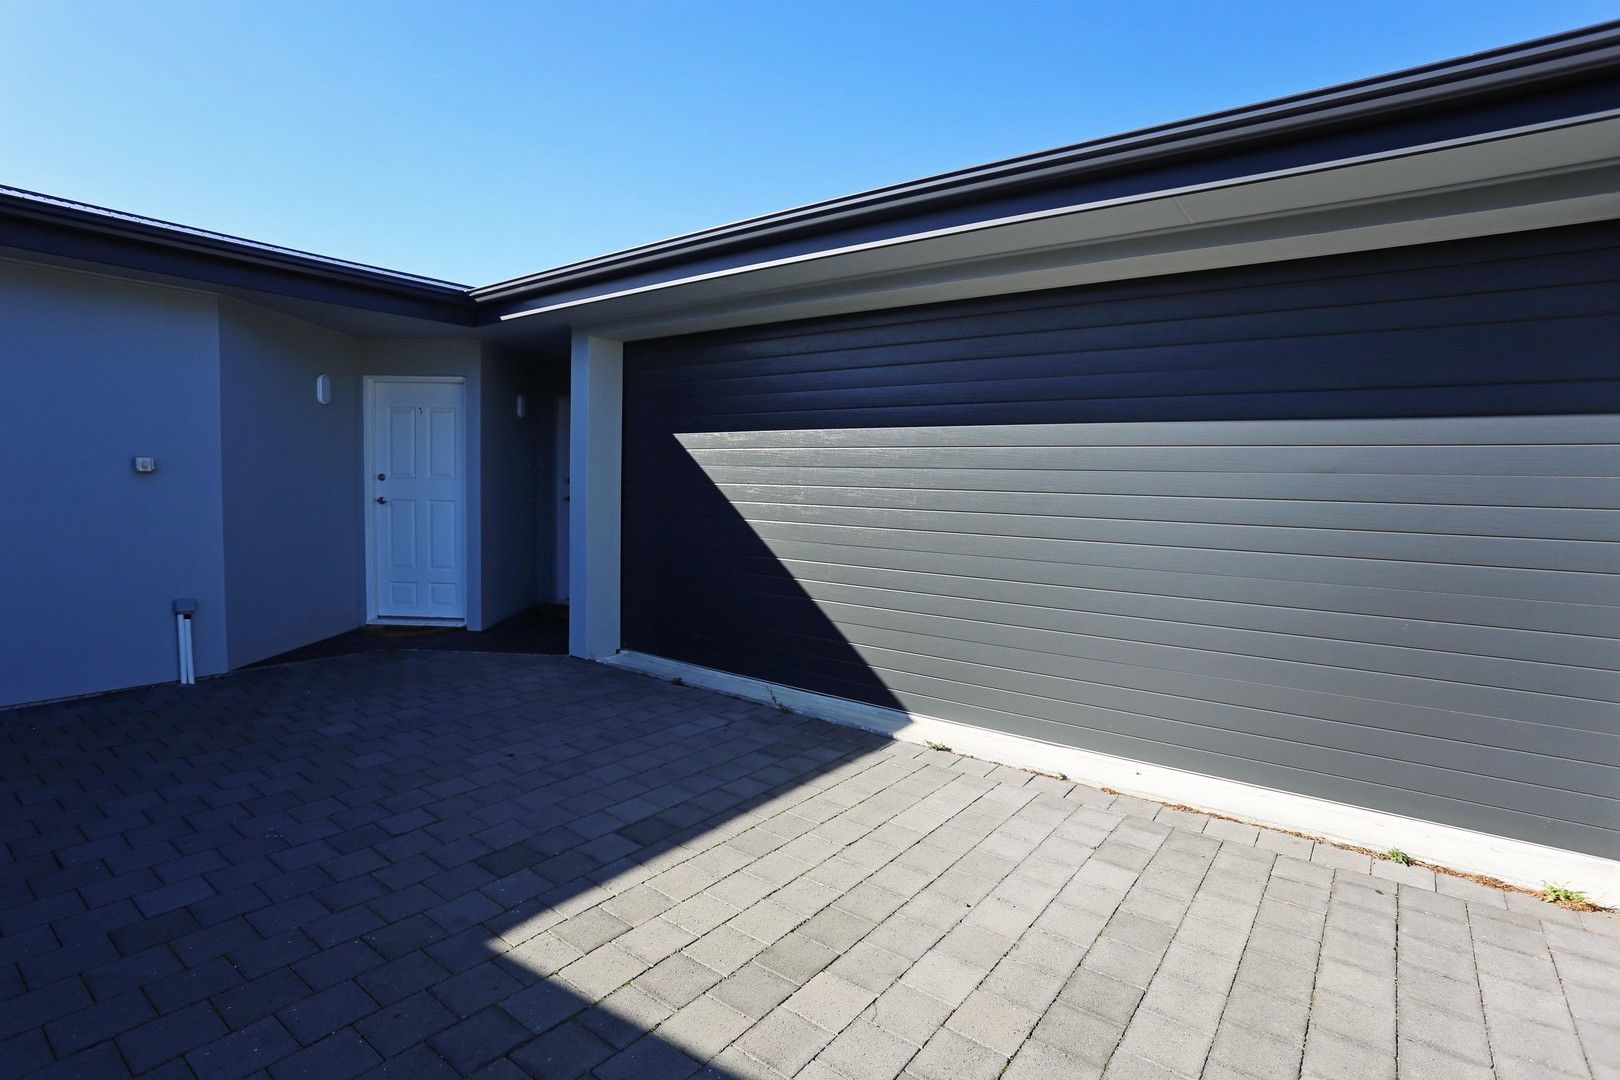 3 bedrooms Apartment / Unit / Flat in 2/13 Cardiff Rd PORT LINCOLN SA, 5606